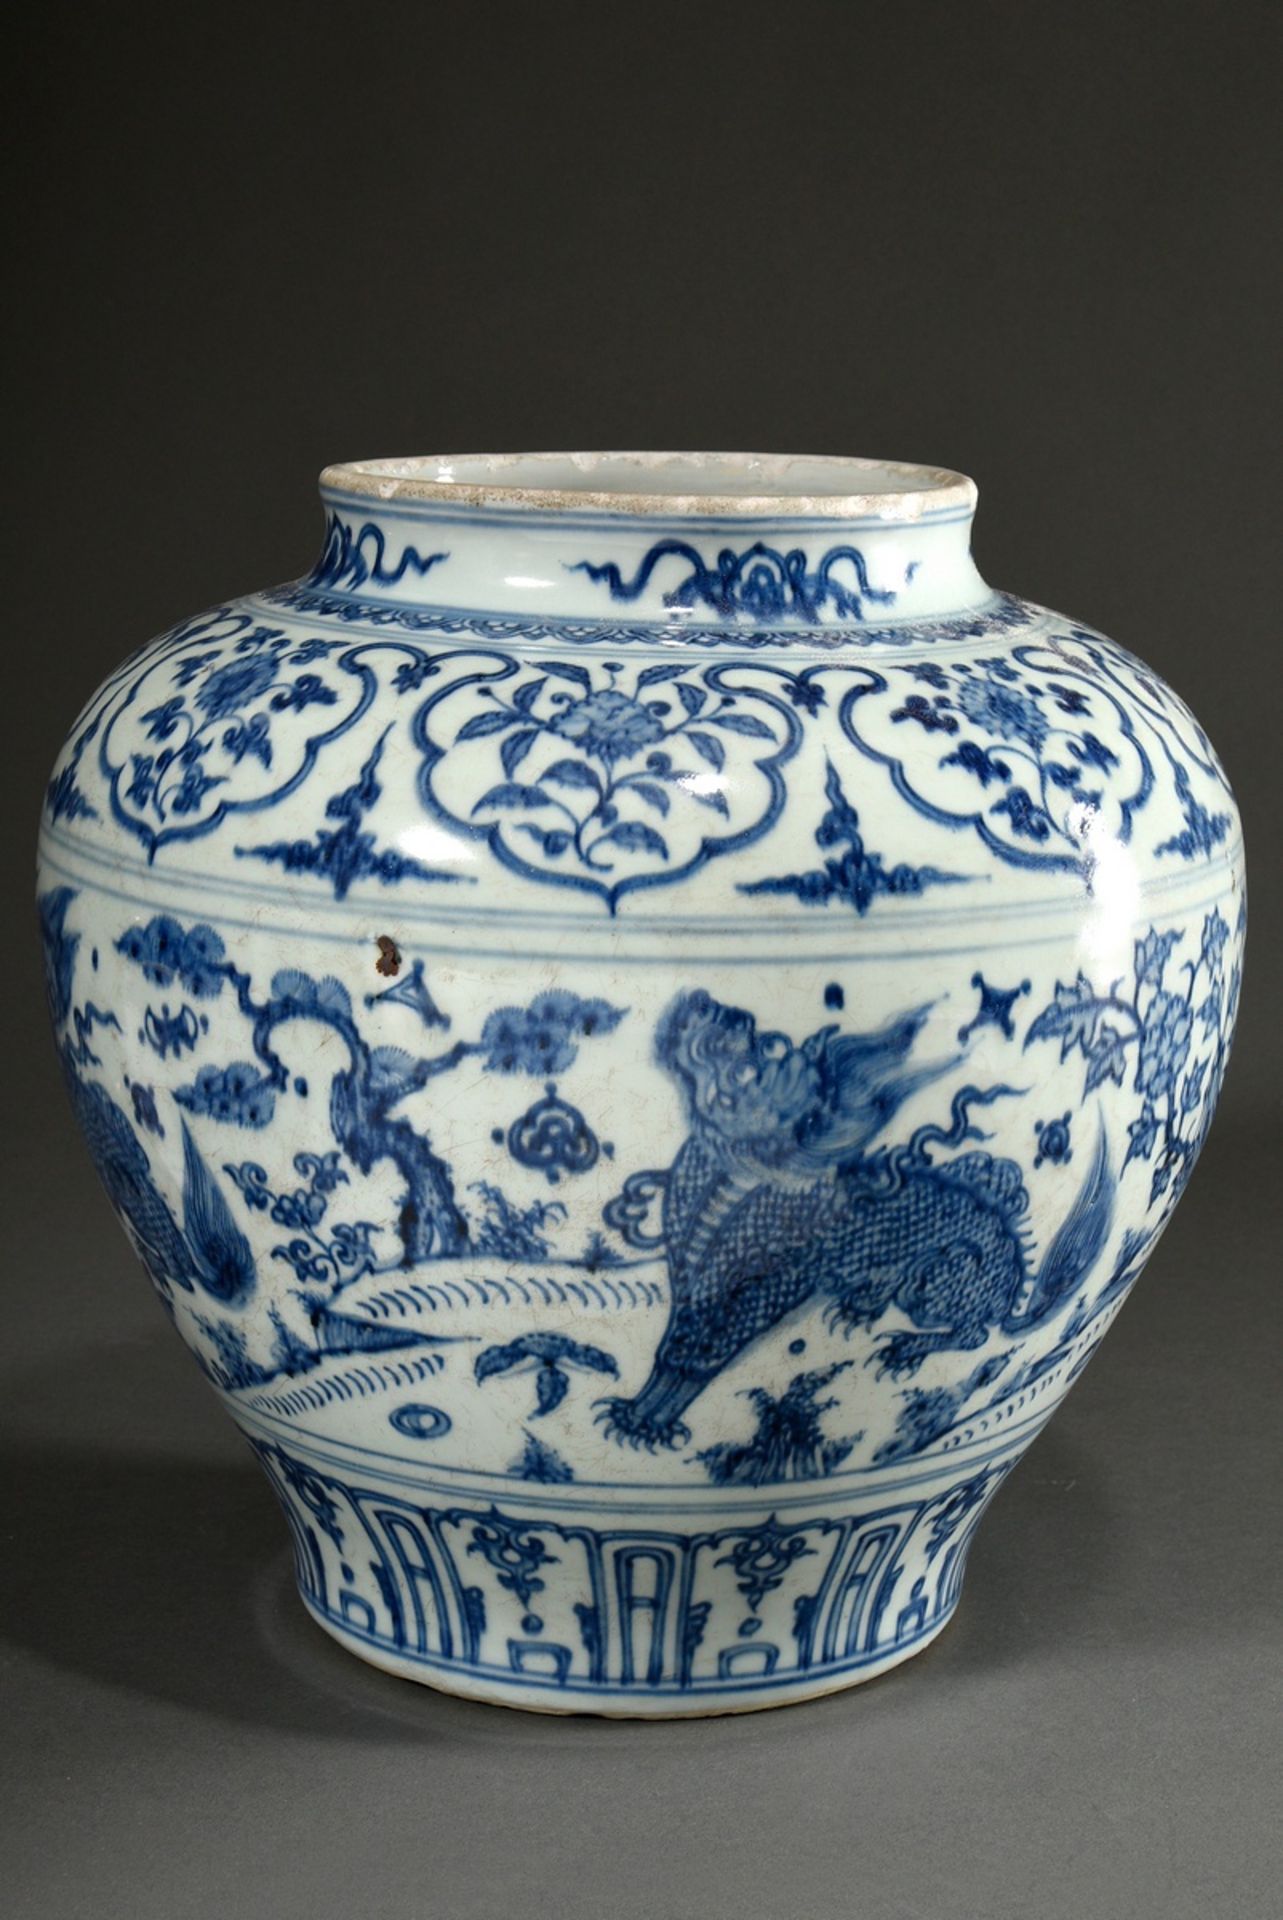 Large Guan pot in the Ming style of the 15th c. with blue painting "fabulous animals", cartouches w